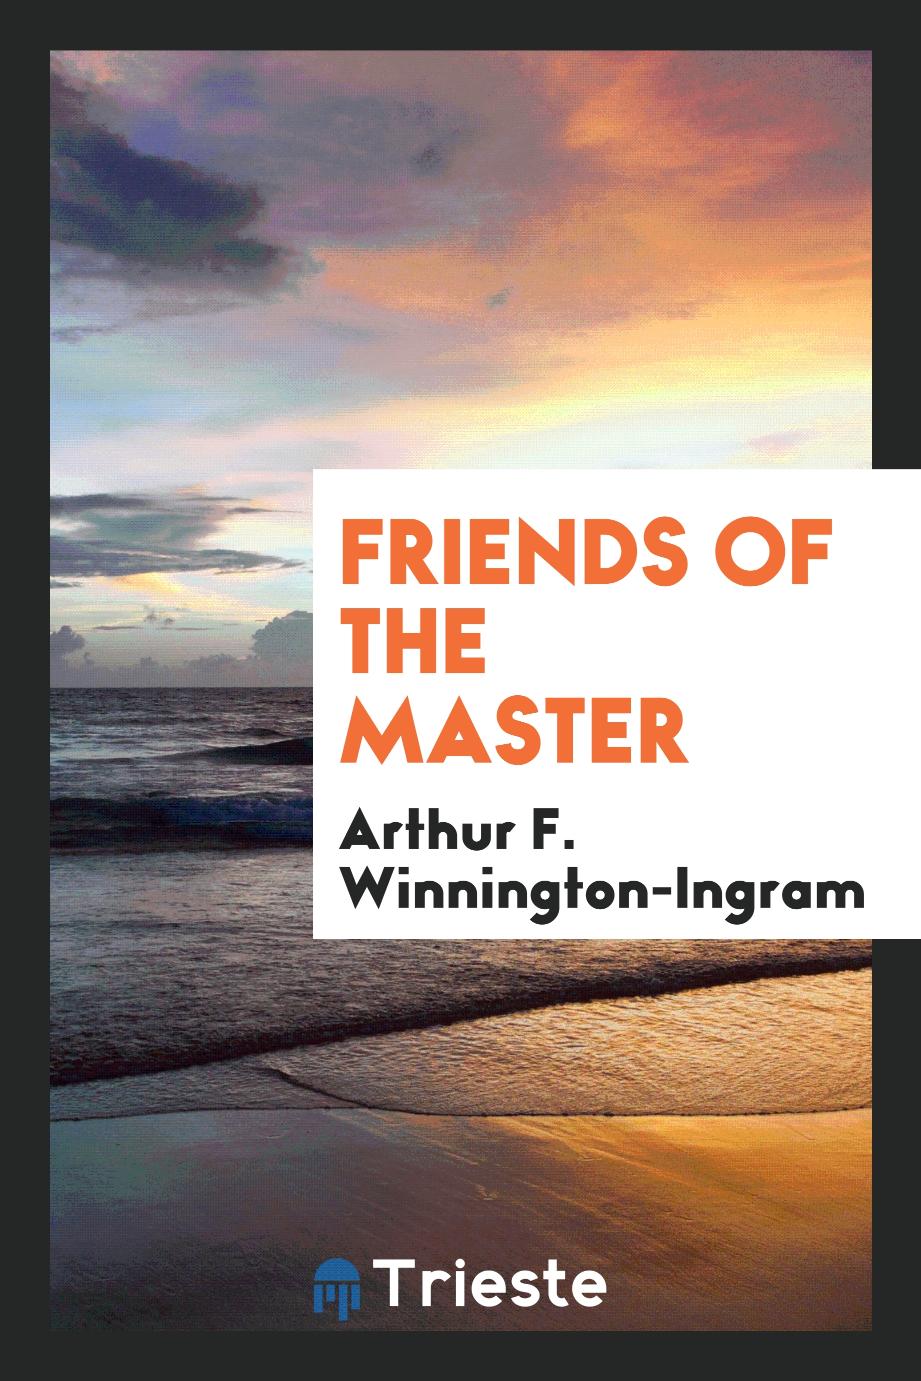 Friends of the Master